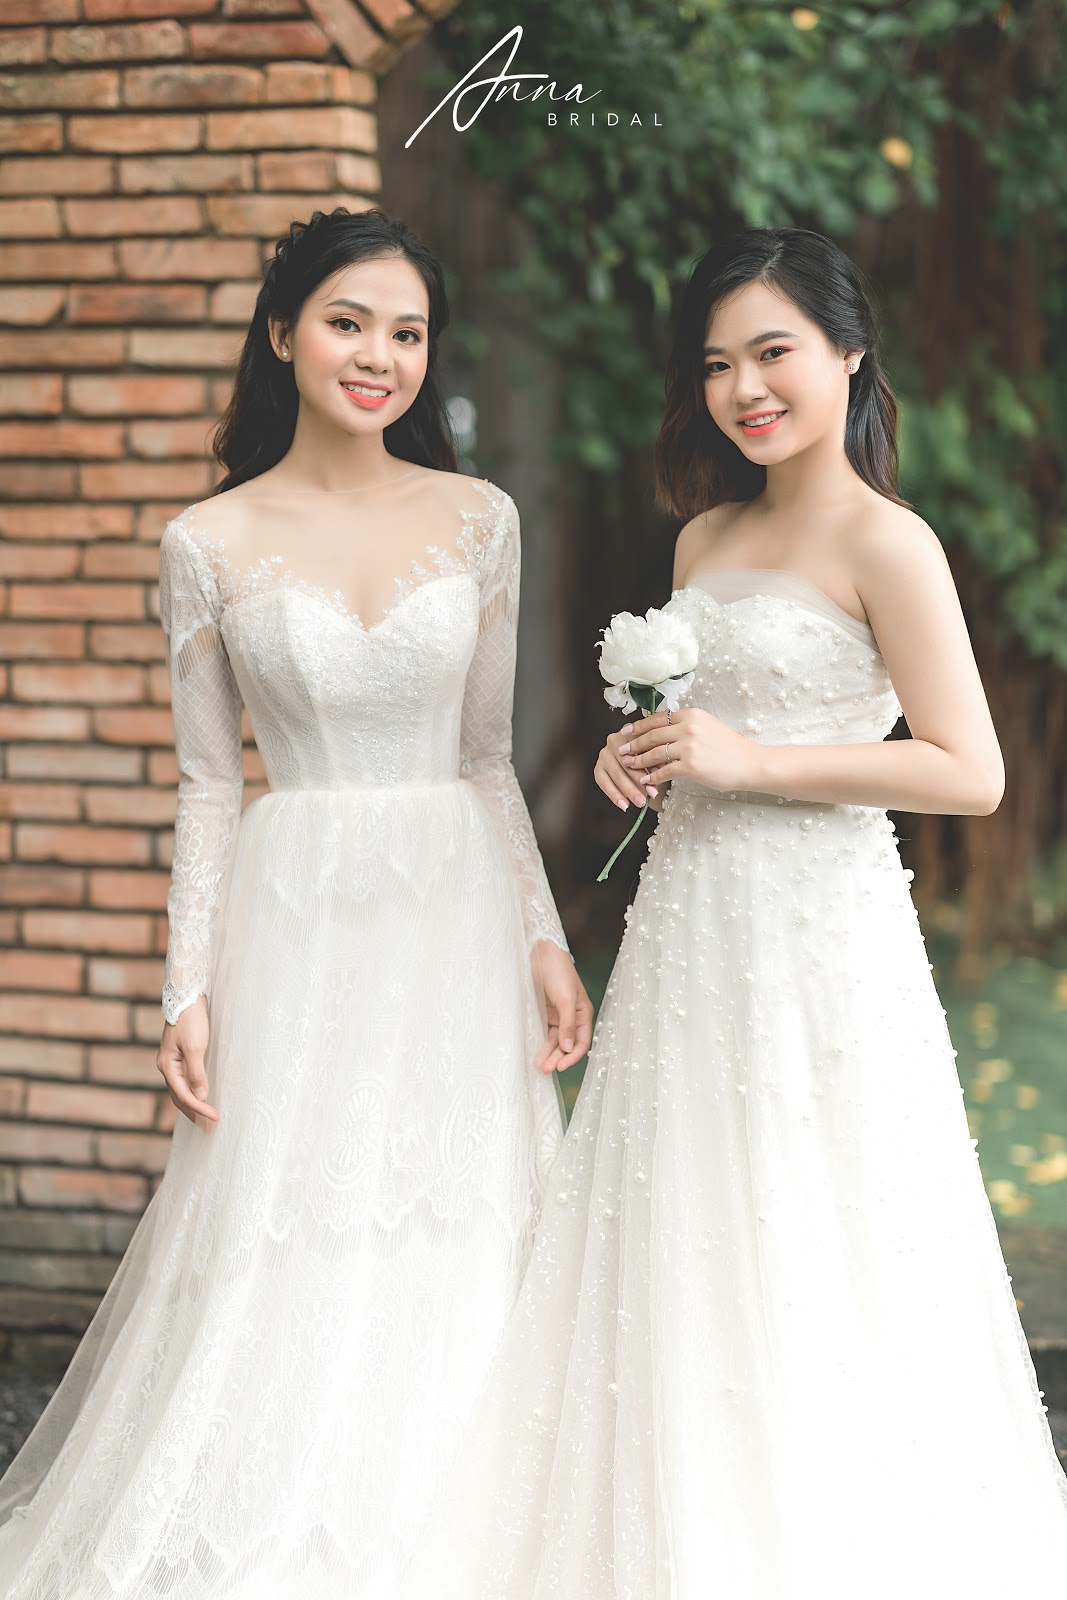 Wedding dresses from Anna Bridal’s Lisa collection